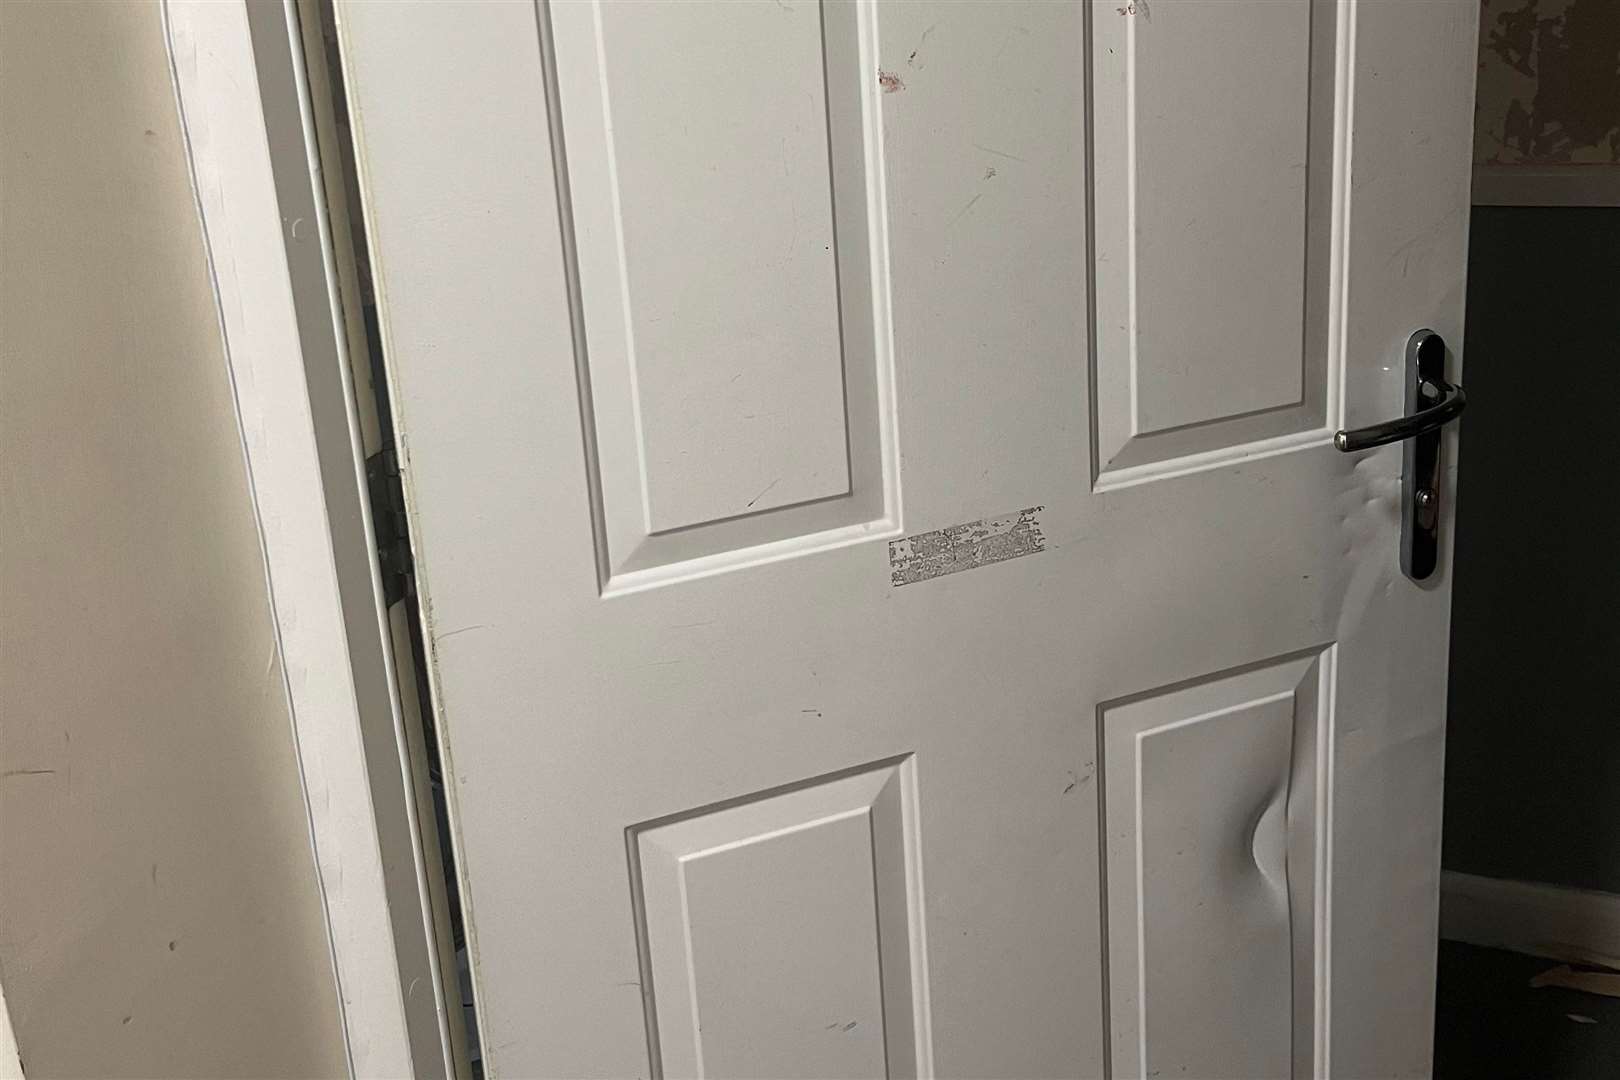 A damaged and blood-stained door at the flat